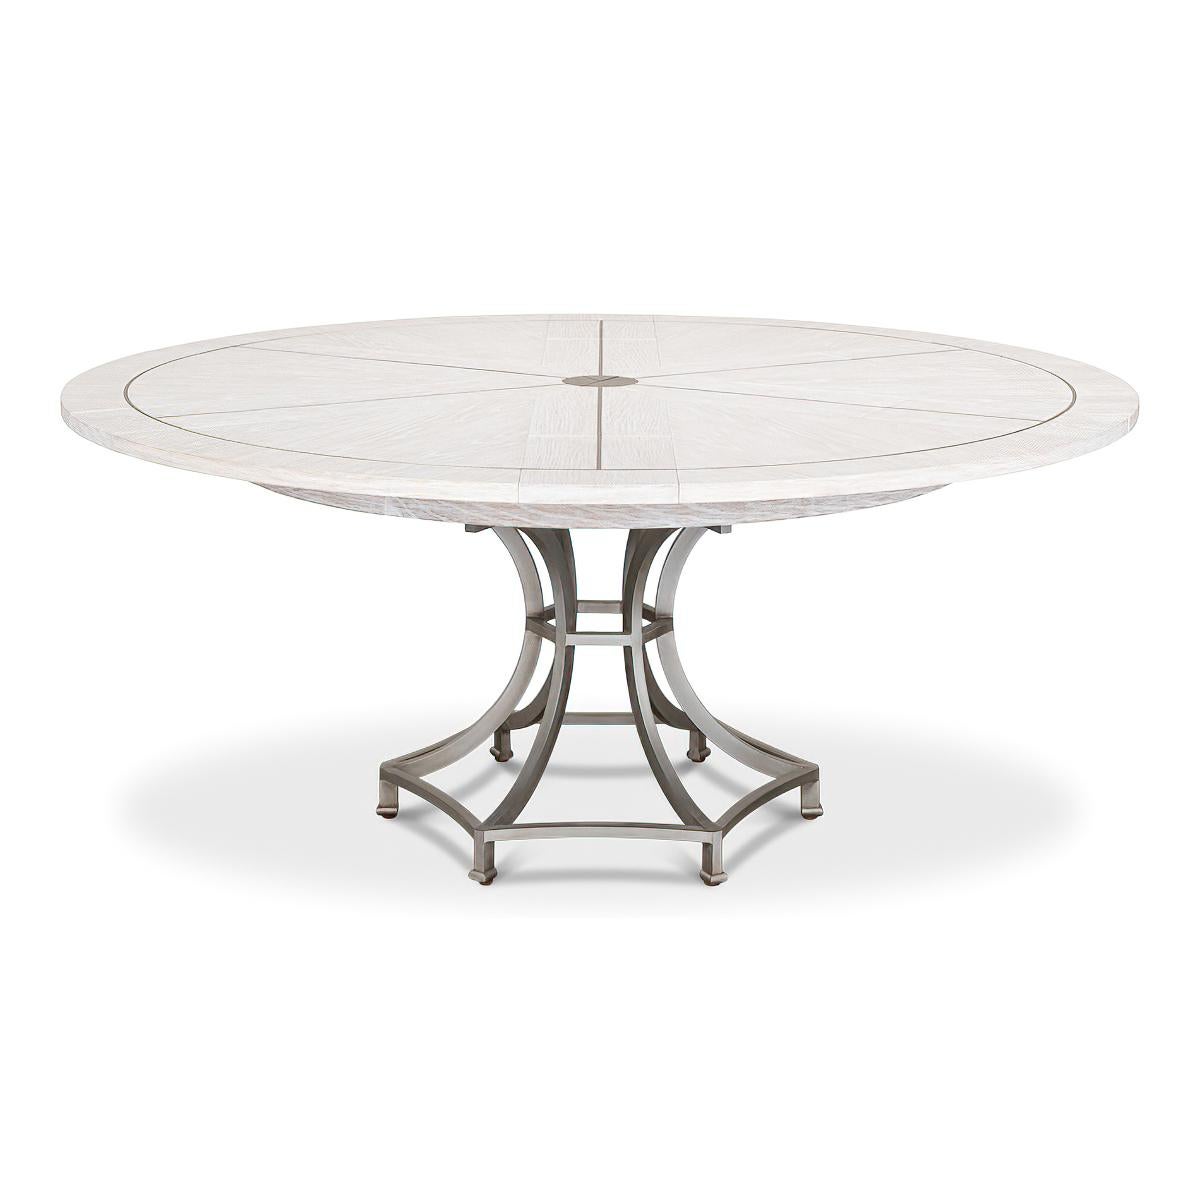 Contemporary Modern Industrial Round Dining Table, White Wash